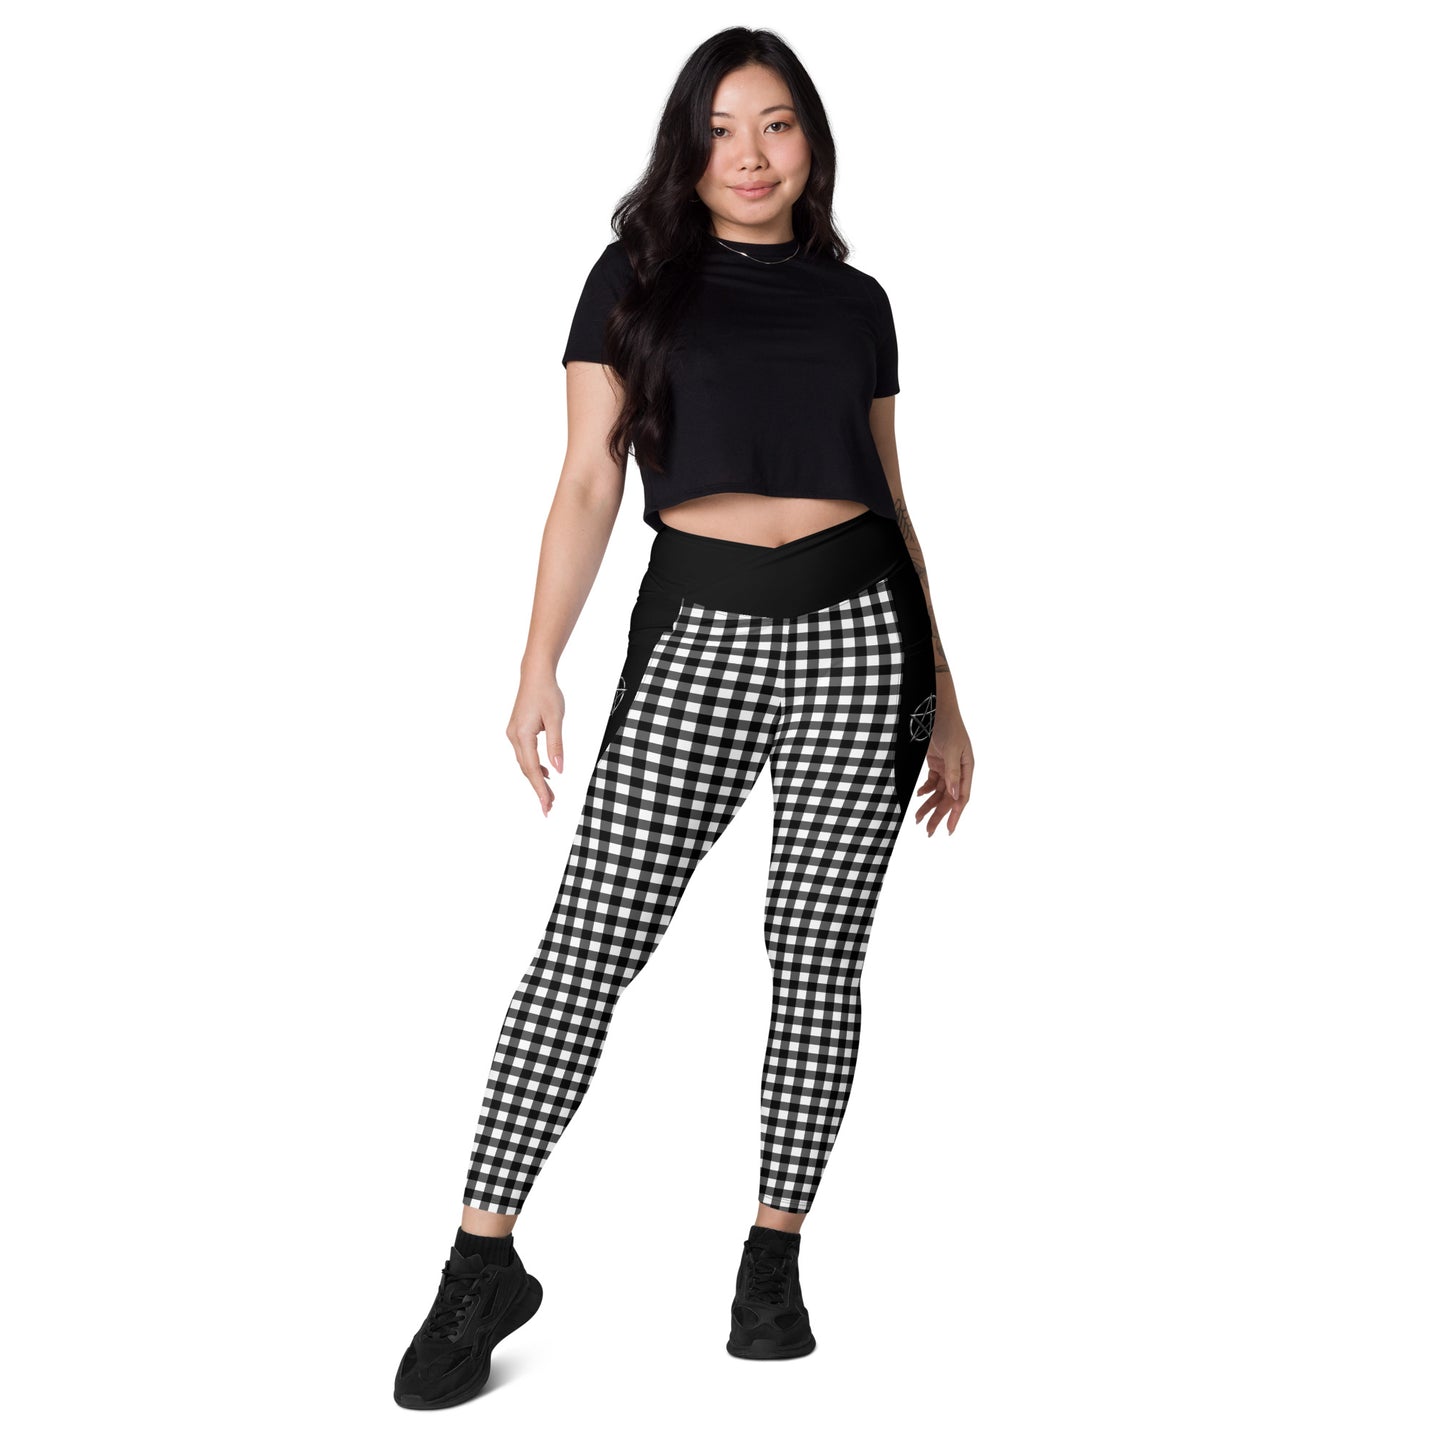 Crossover leggings with pockets Checkered Black